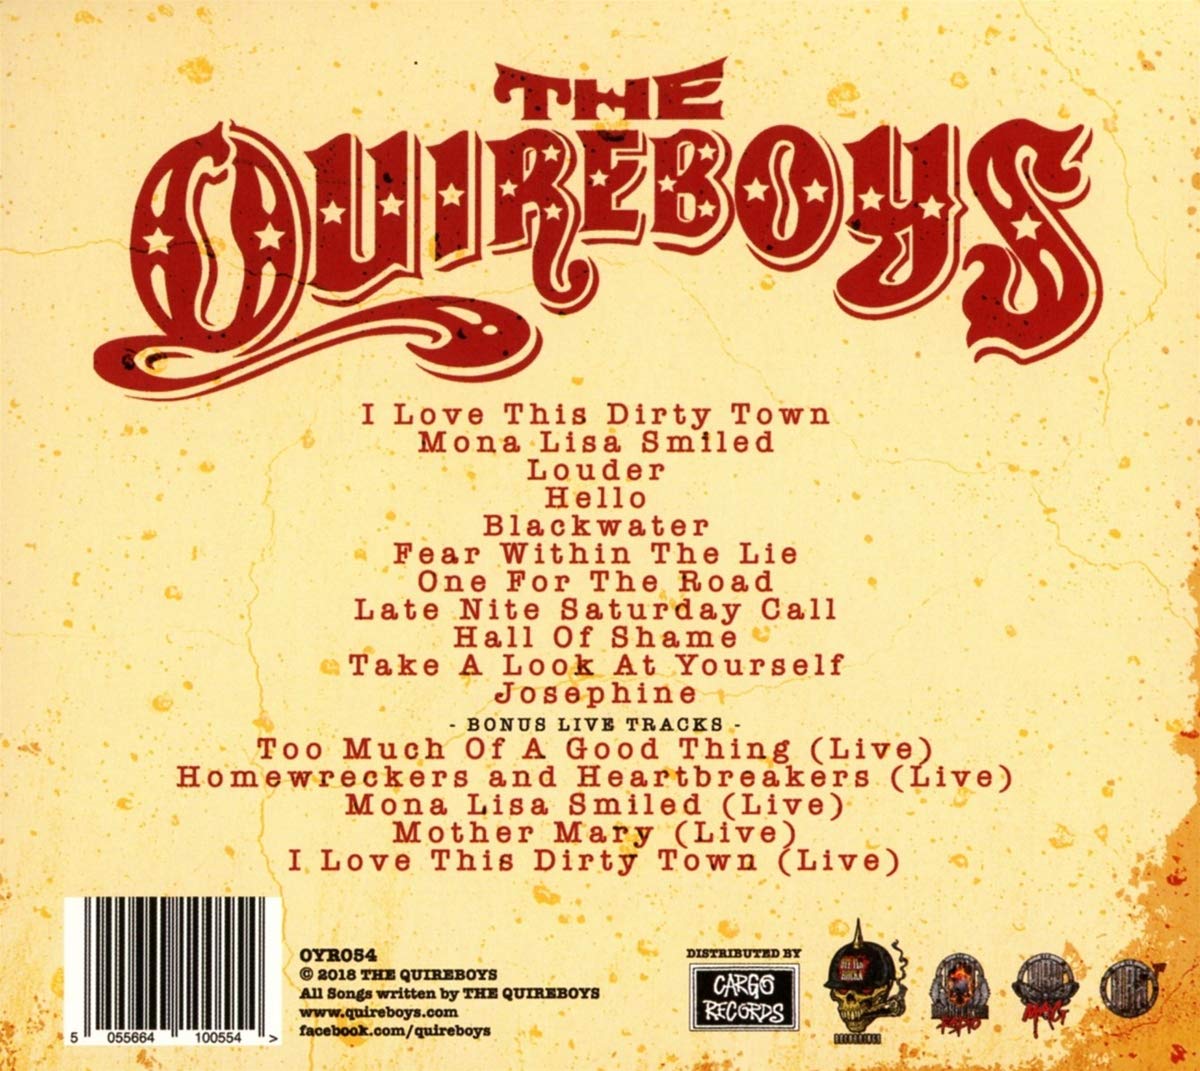 Classic Rock Covers Database: The Quireboys